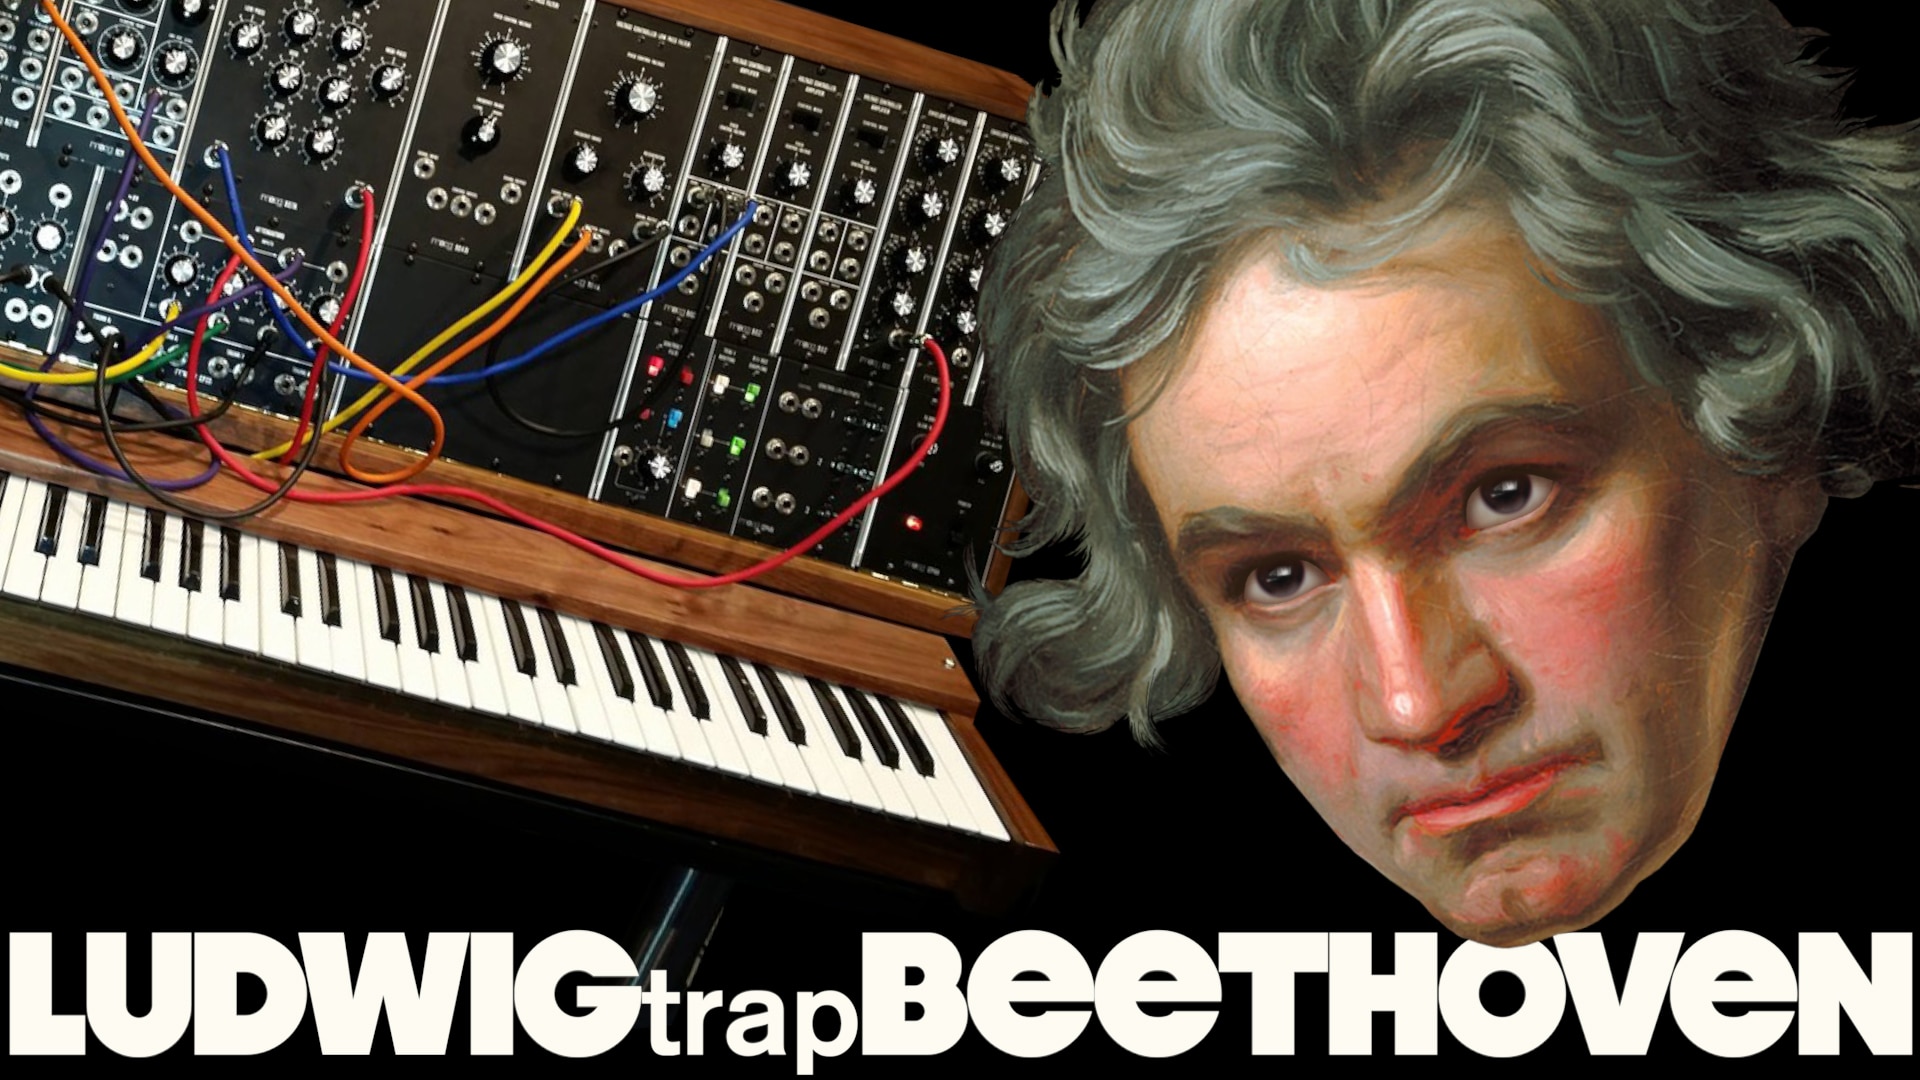 Ludwig trap Beethoven